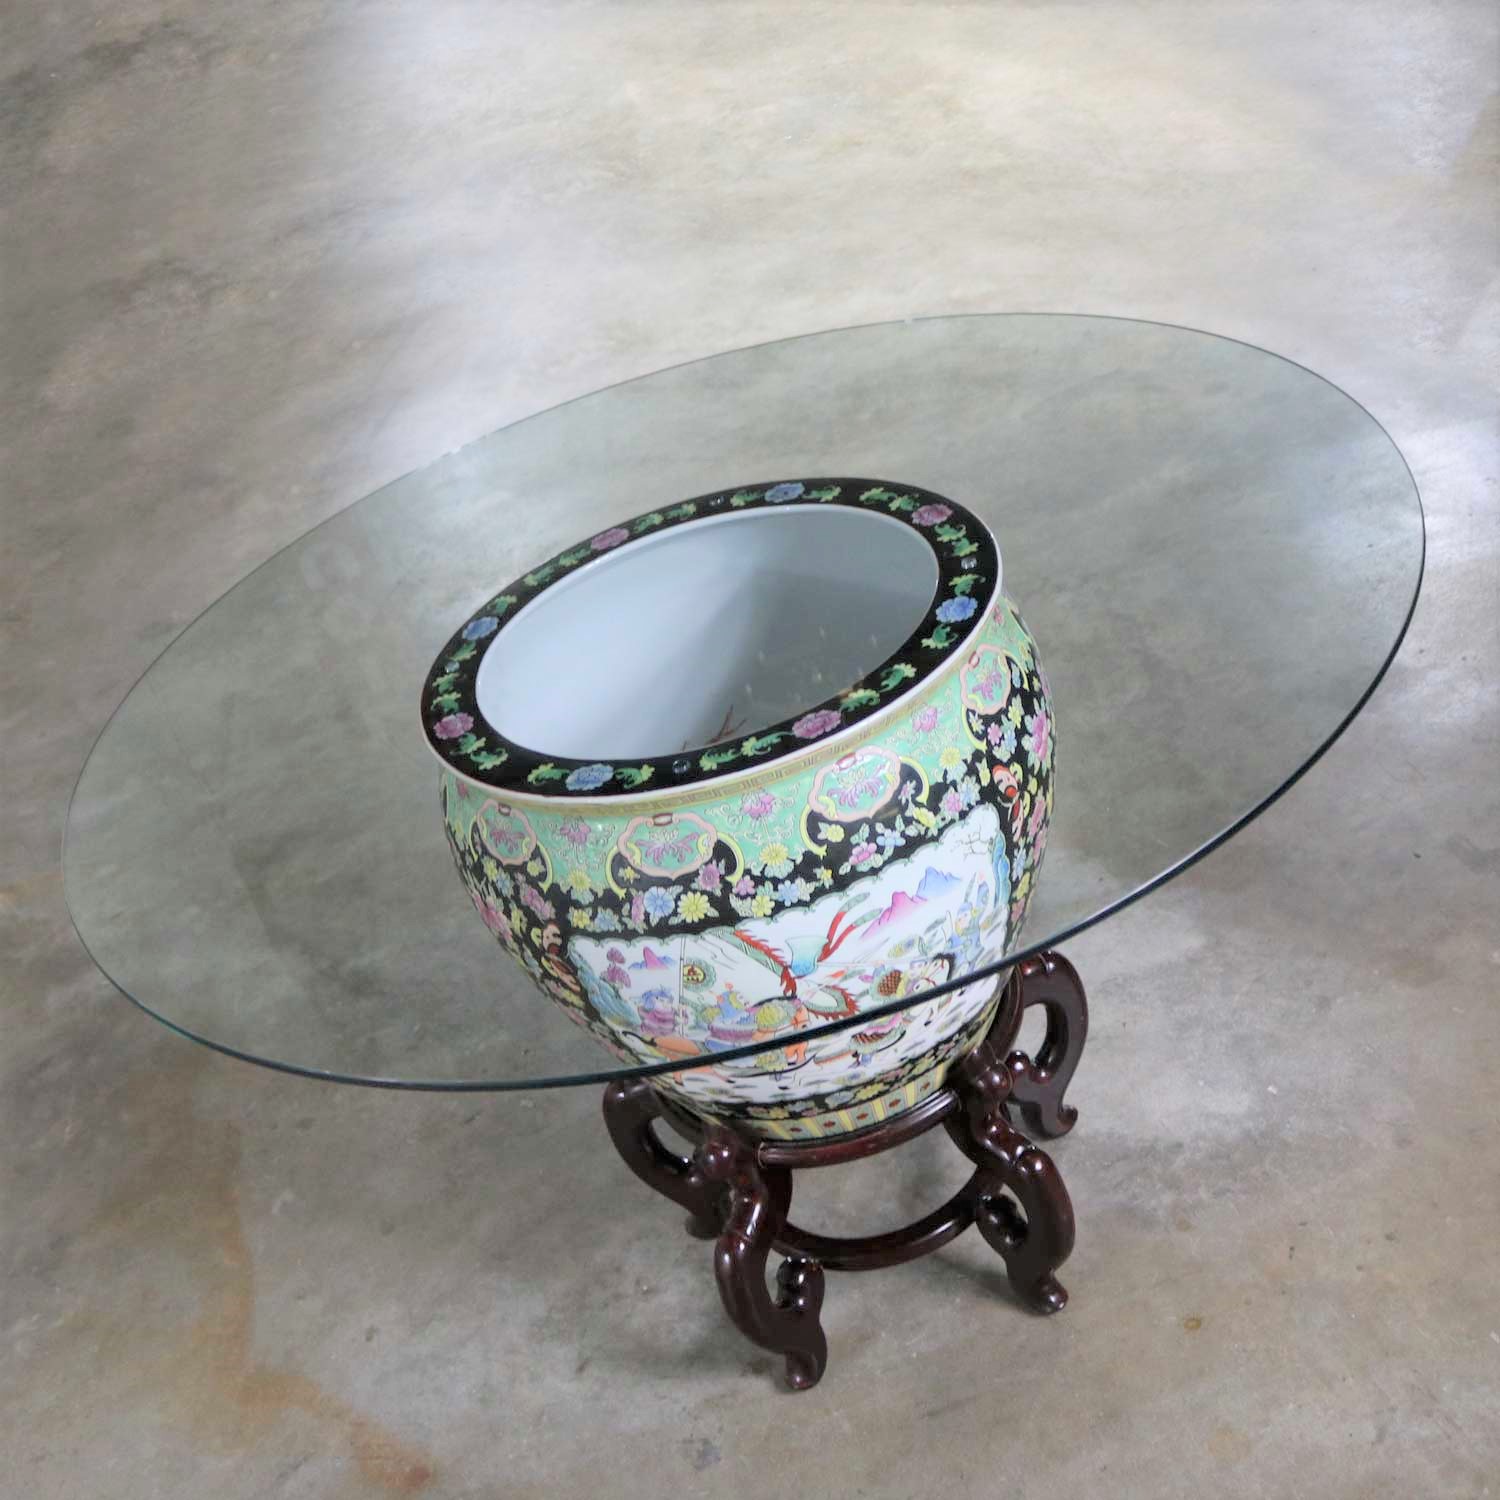 Chinese Porcelain Fish Bowl on Stand with Round Glass Top as Dining or Center Table